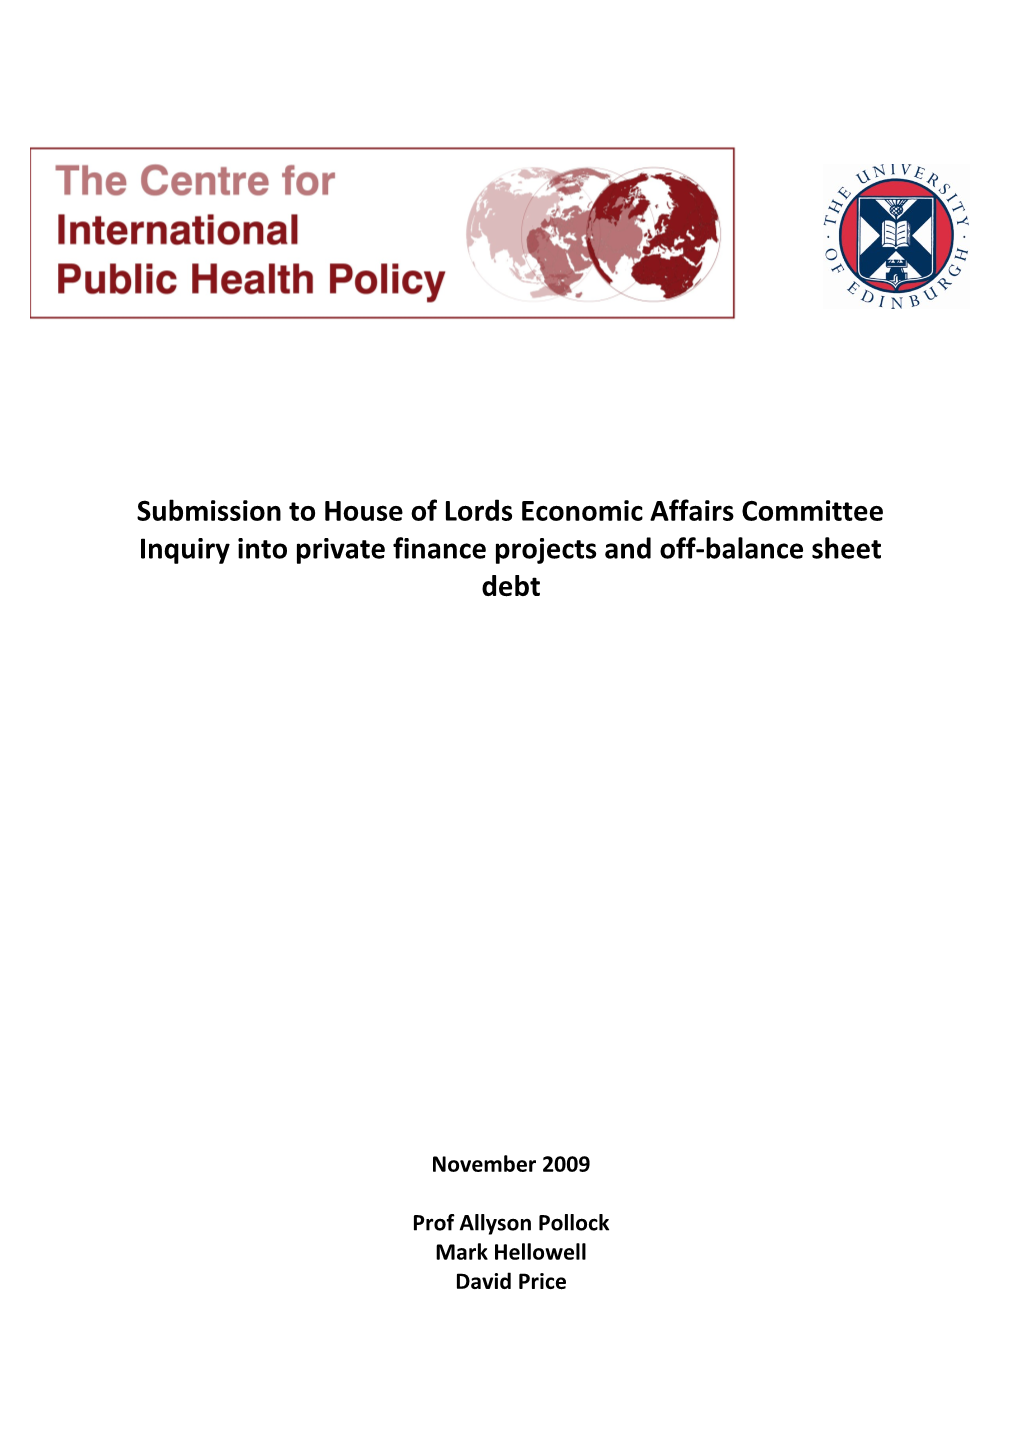 Submission to House of Lords Economic Affairs Committee Inquiry Into Private Finance Projects